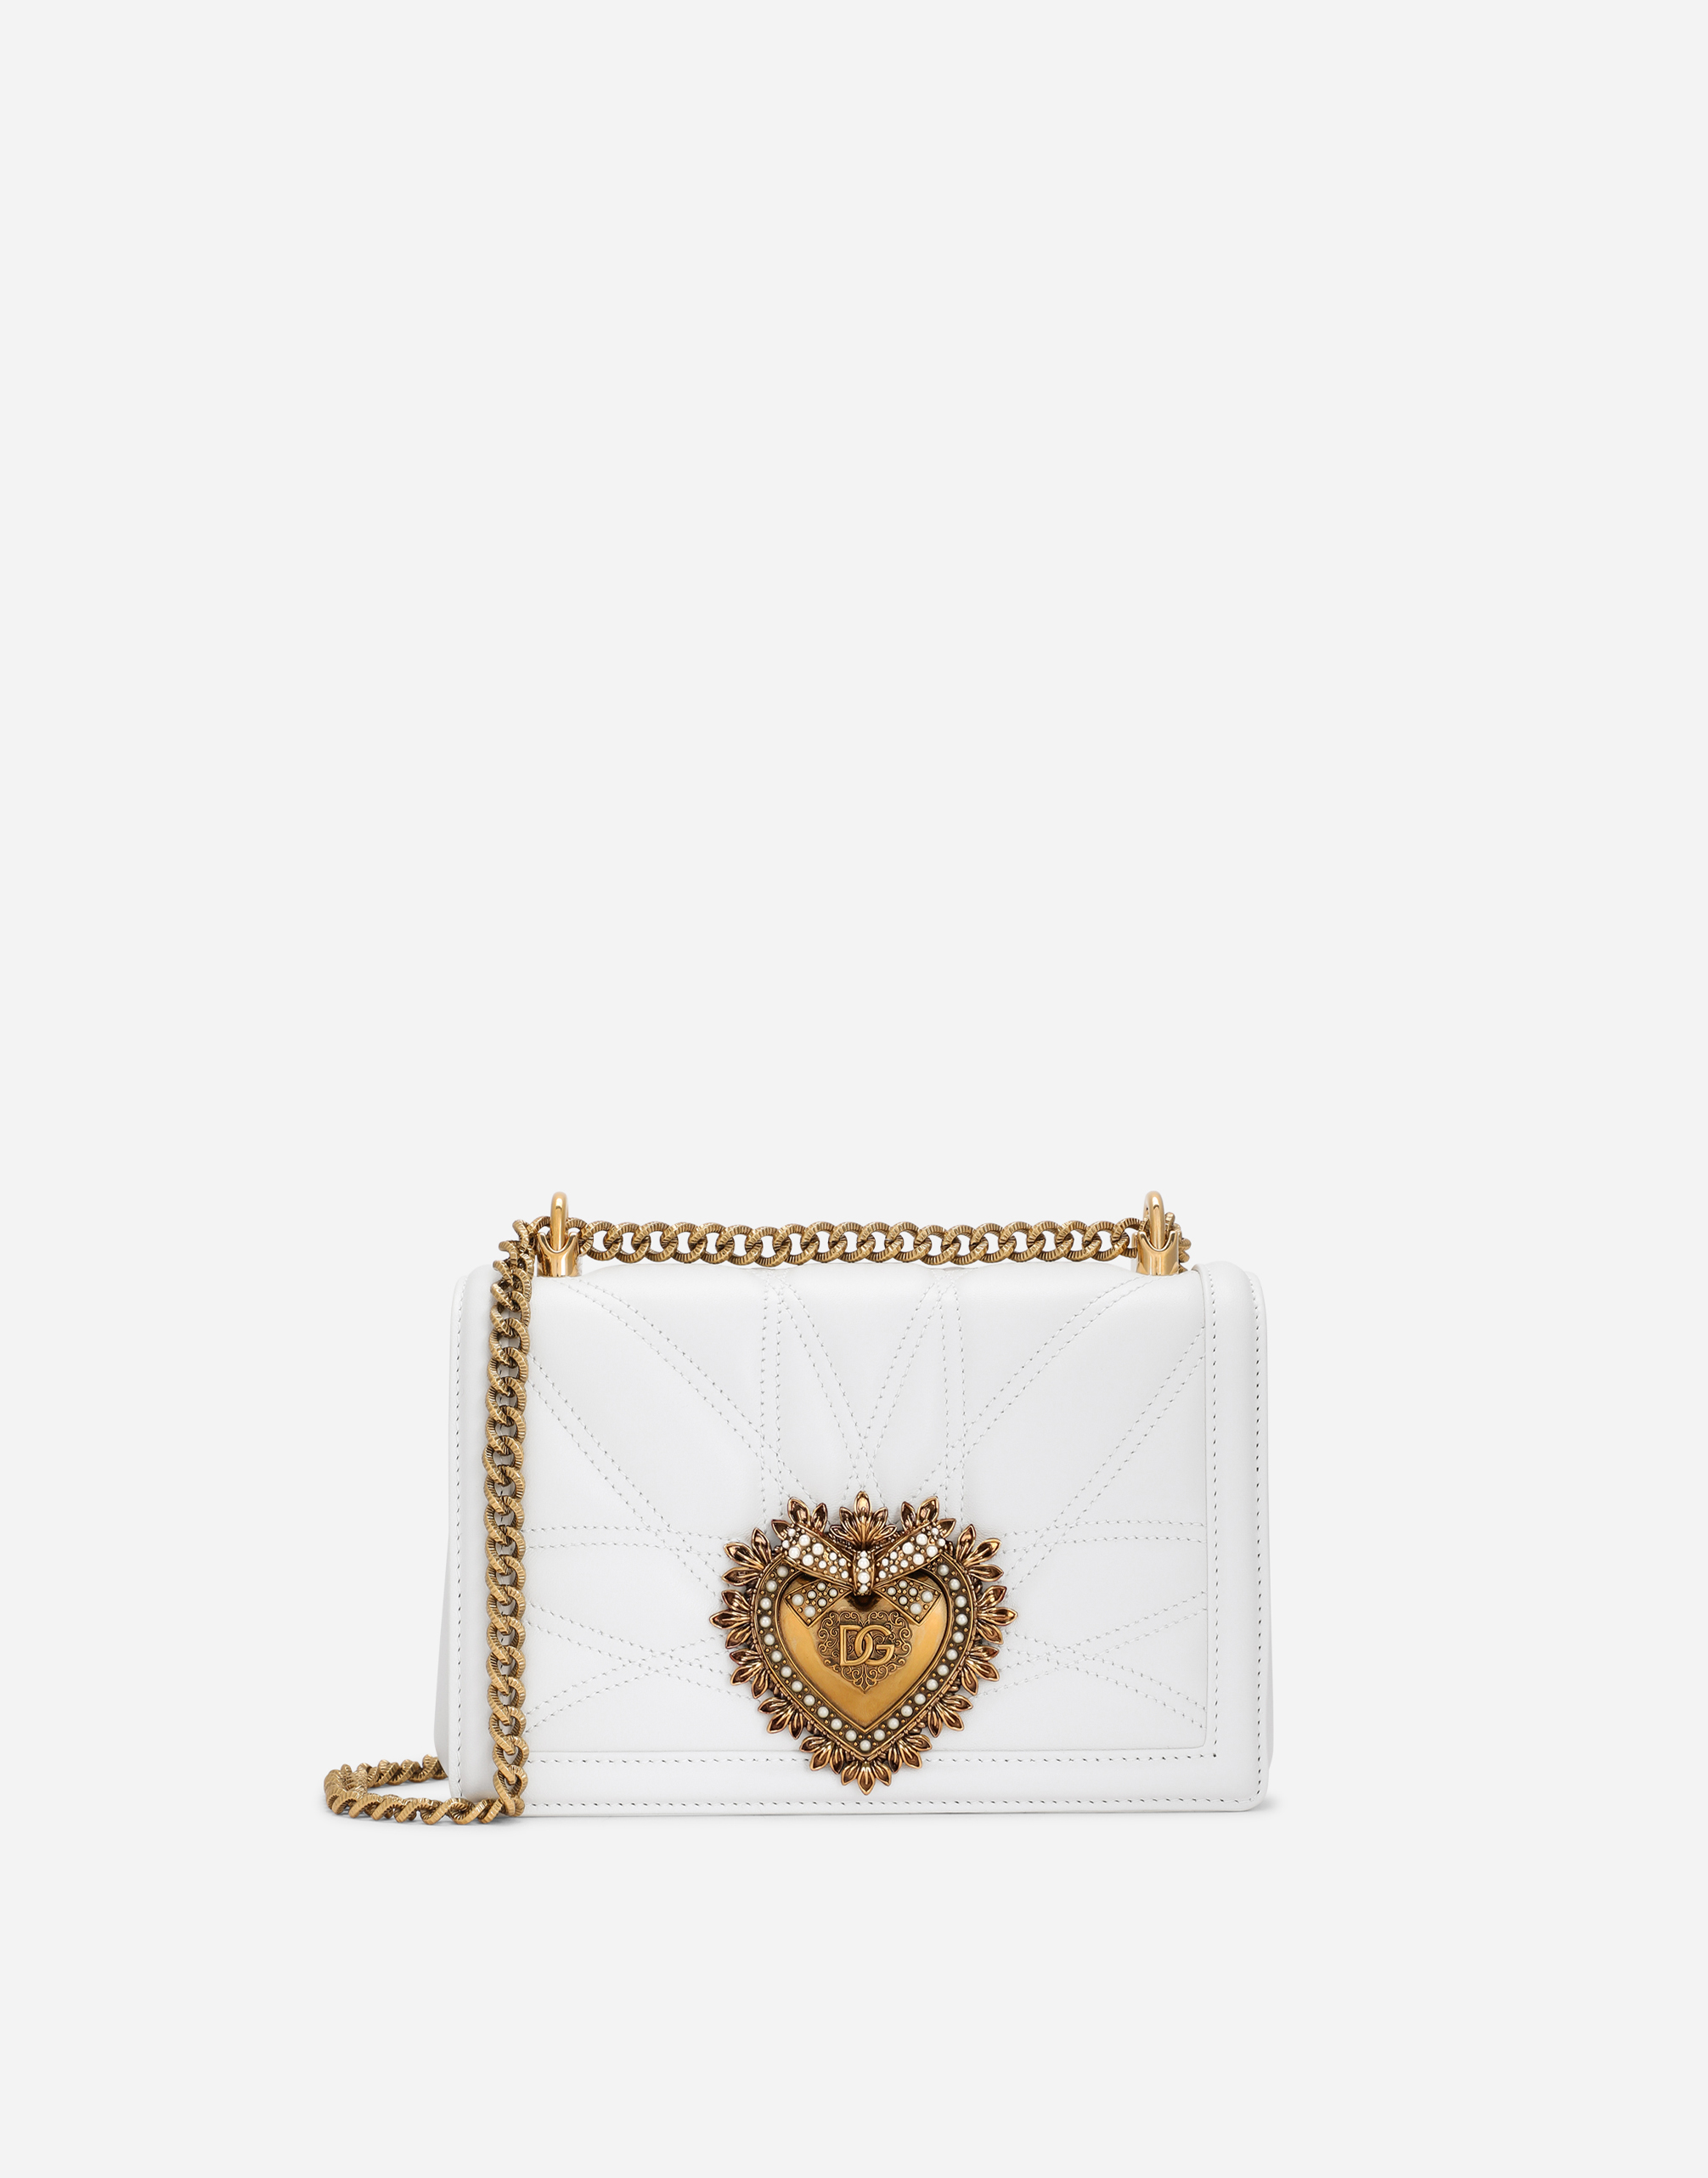 Medium Devotion bag in quilted nappa leather in White